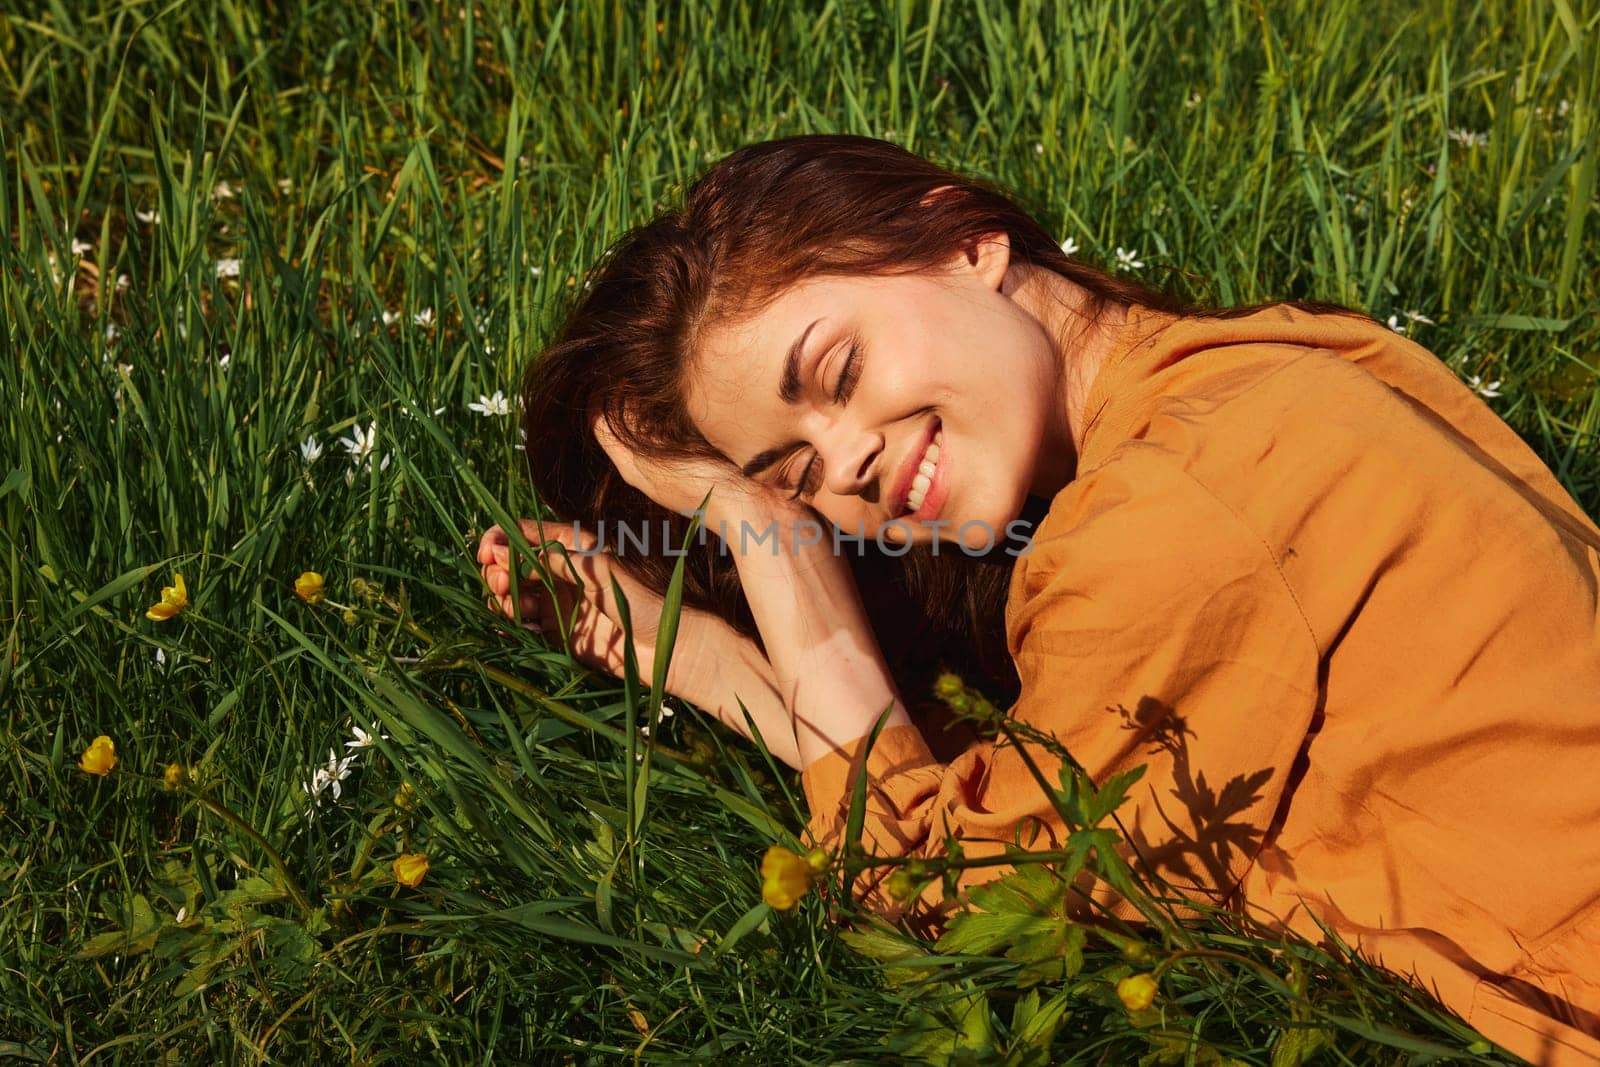 a calm woman with long red hair lies in a green field with yellow flowers, in an orange dress smiling pleasantly, closing her eyes from the bright summer sun by Vichizh